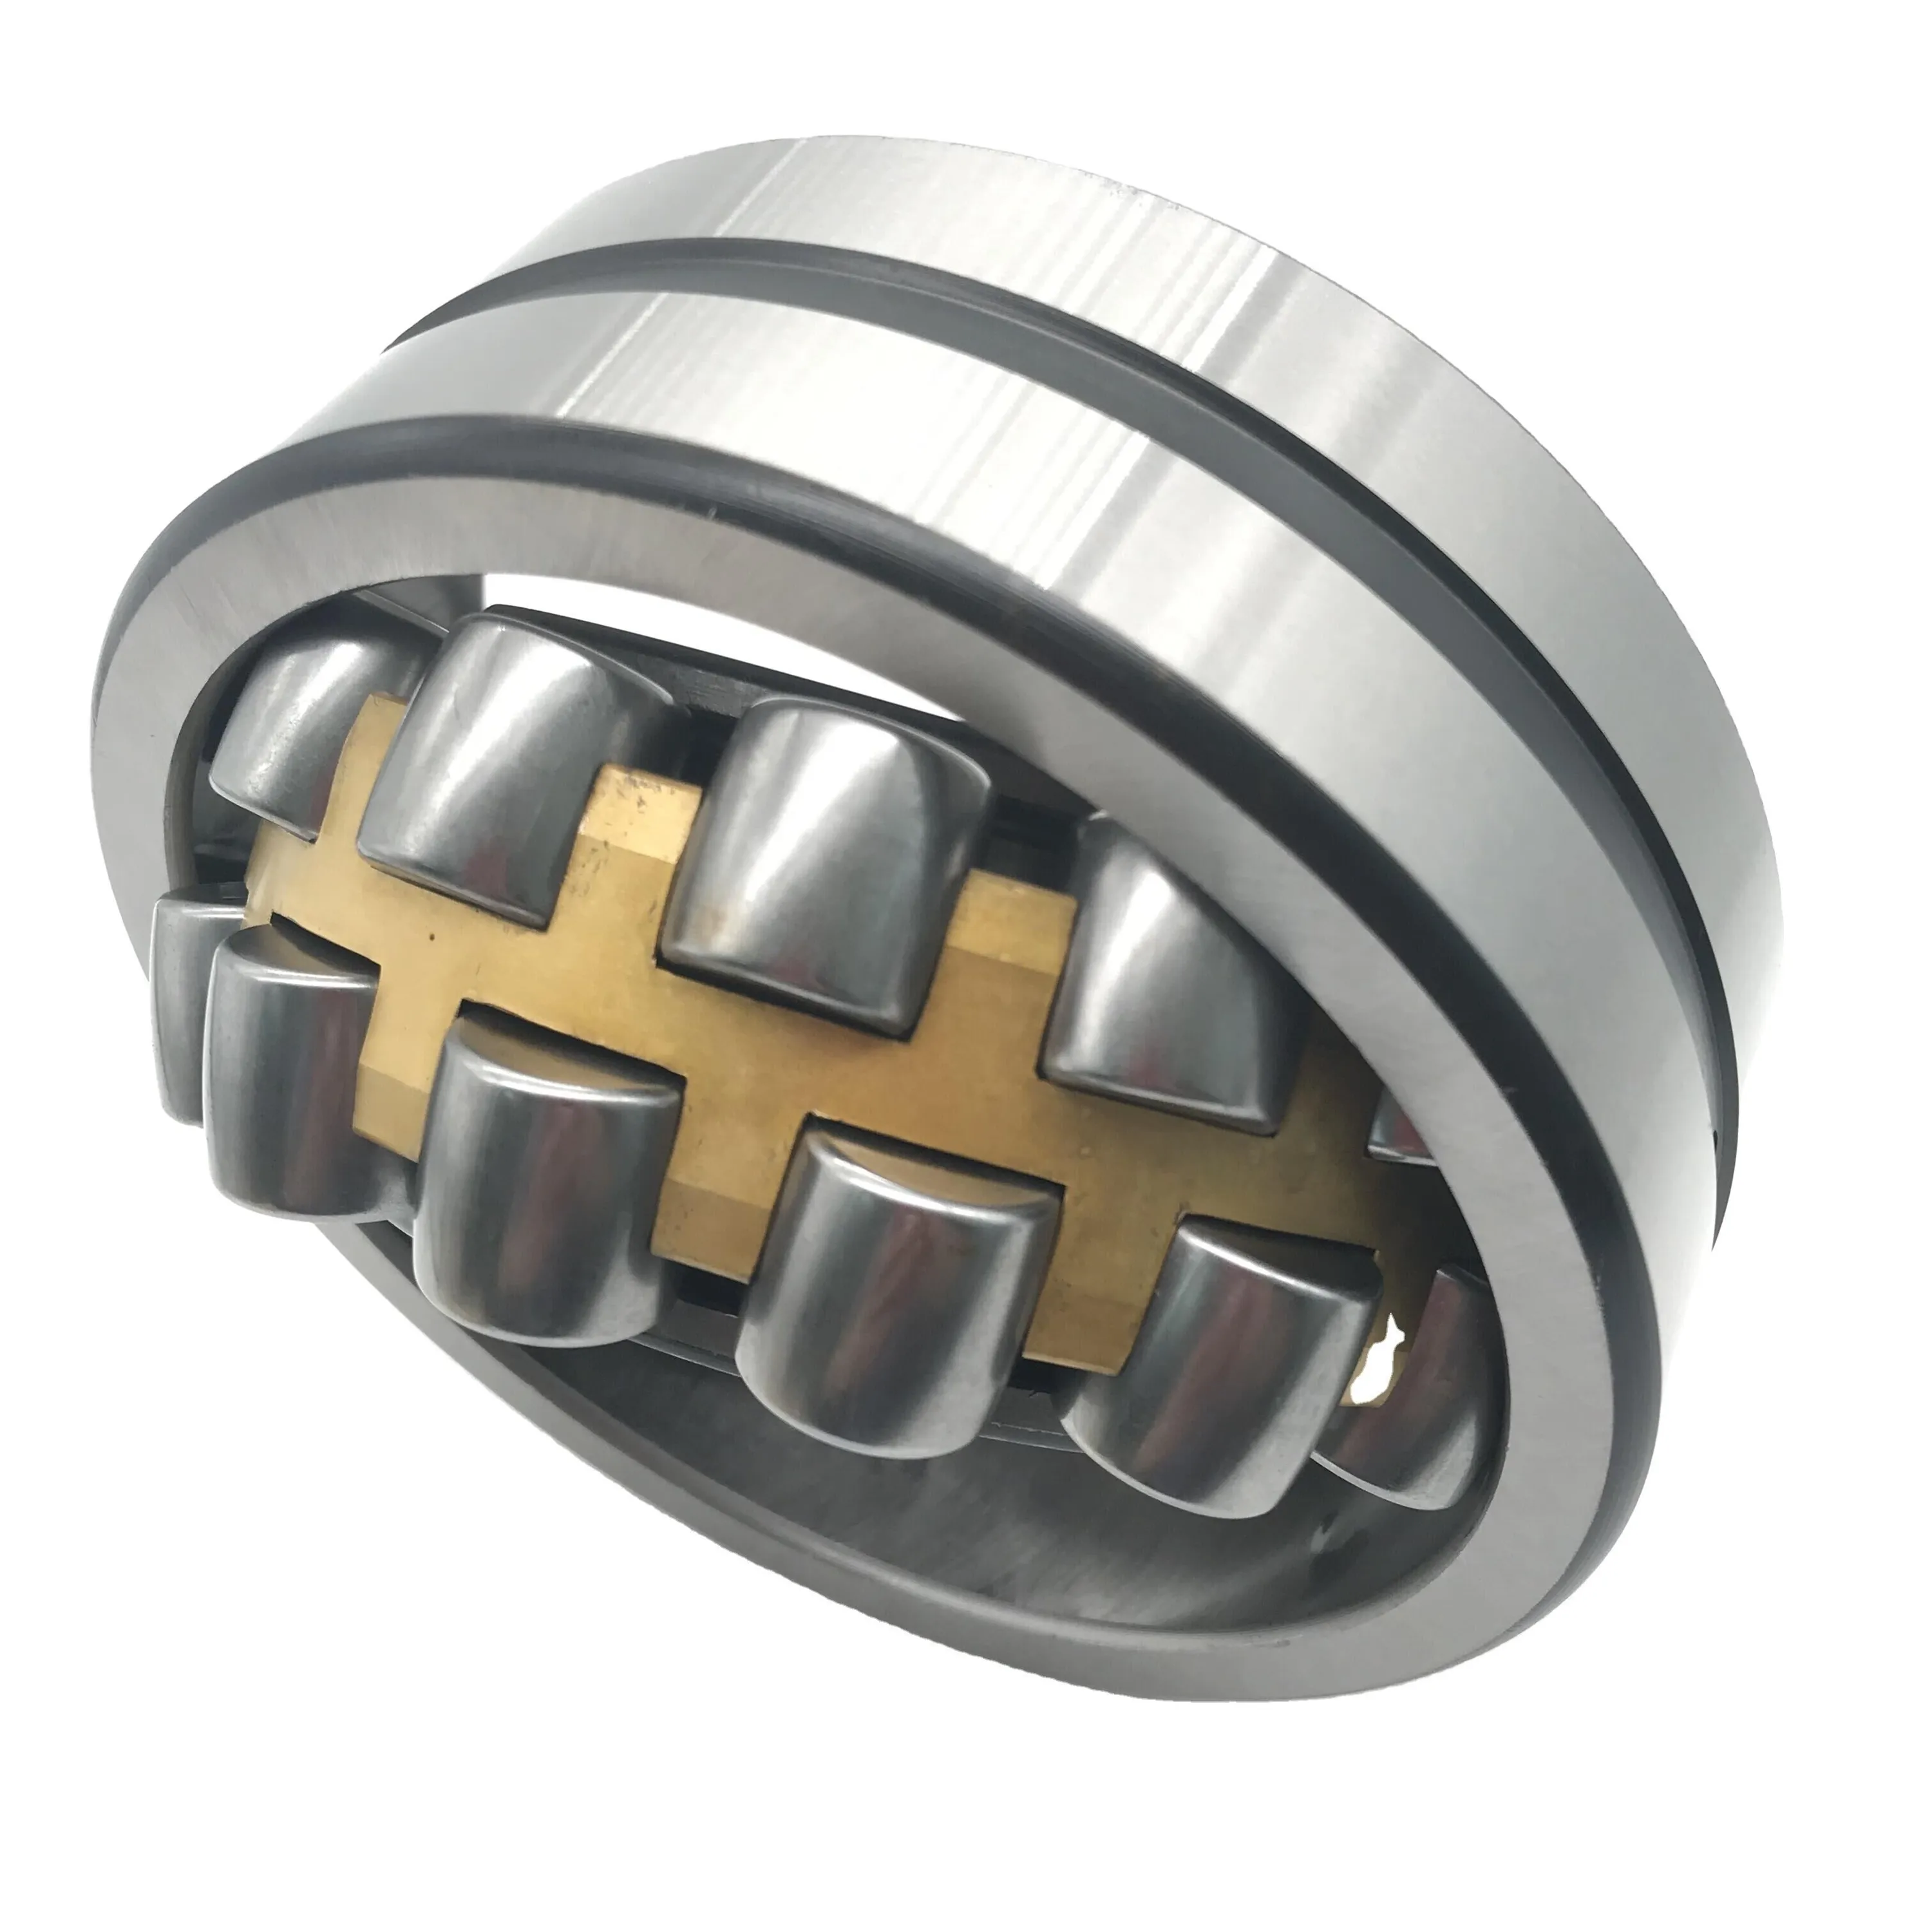 Hot sales 23126-E1-XL-TVPB Spherical roller bearing made in China